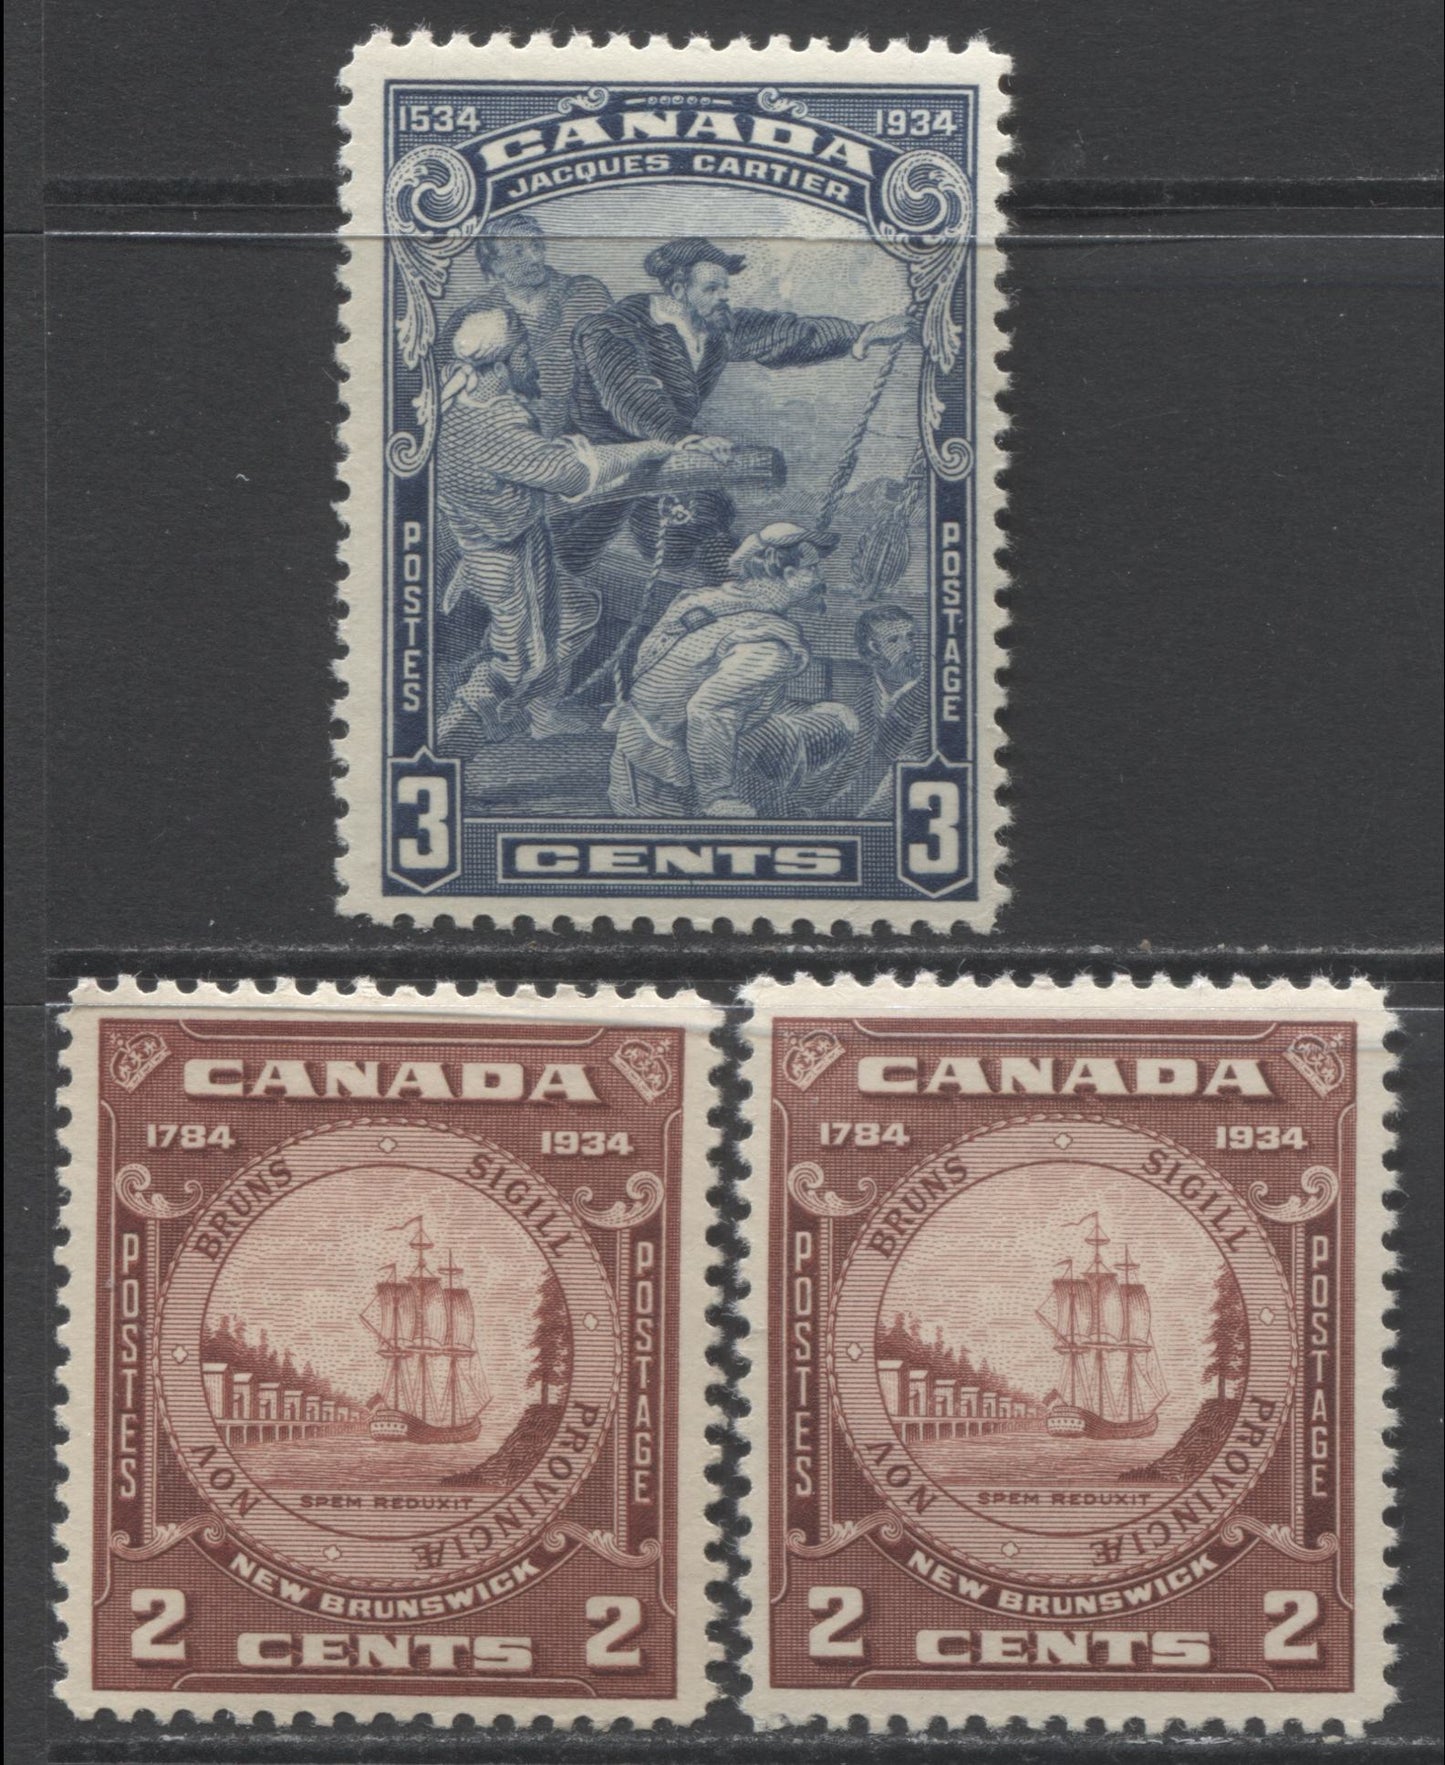 Lot 182 Canada #208, 210, 210i 3c & 2c Blue & Red Brown Jacques Cartier & New Brunswick Seal, 1934 Jacques Cartier & New Brunswick Issues, 3 Fine NH and VFNH Singles With Deep Cream & Crackly Gums